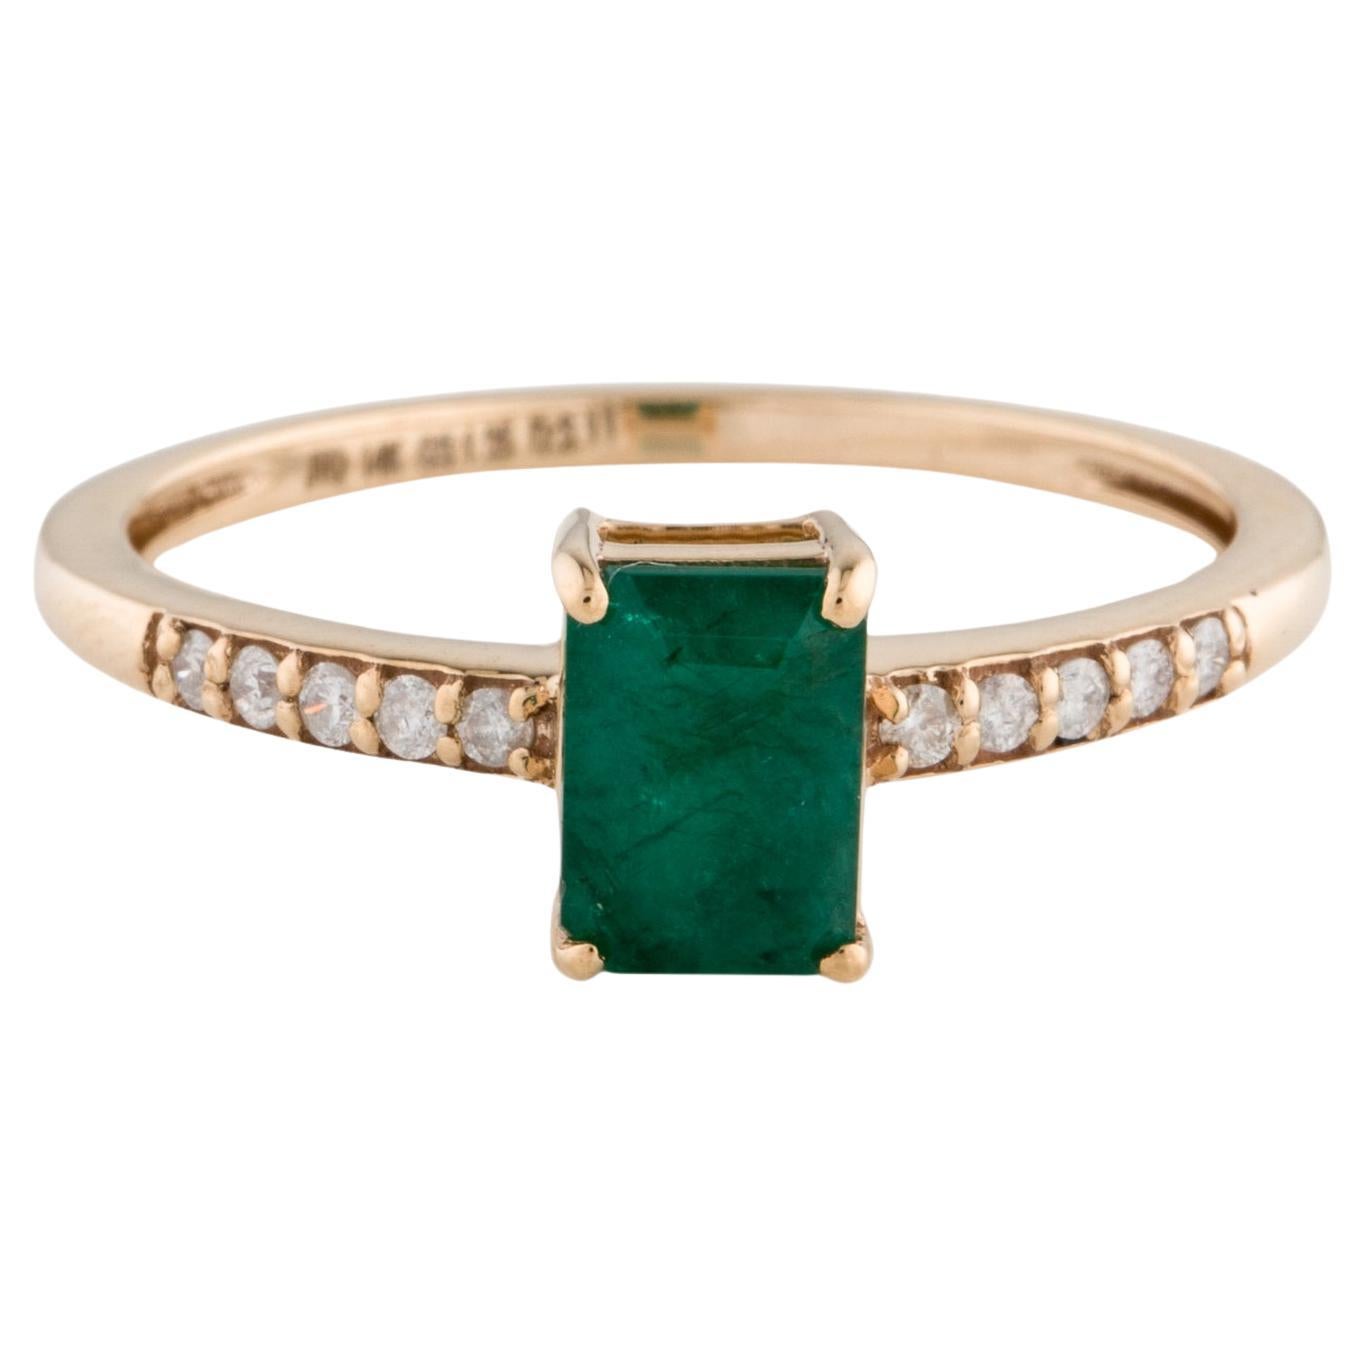 Elegant 14K Gold 1.05ct Emerald & Diamond Ring - Size 8.75 - Classic & Timeless For Sale